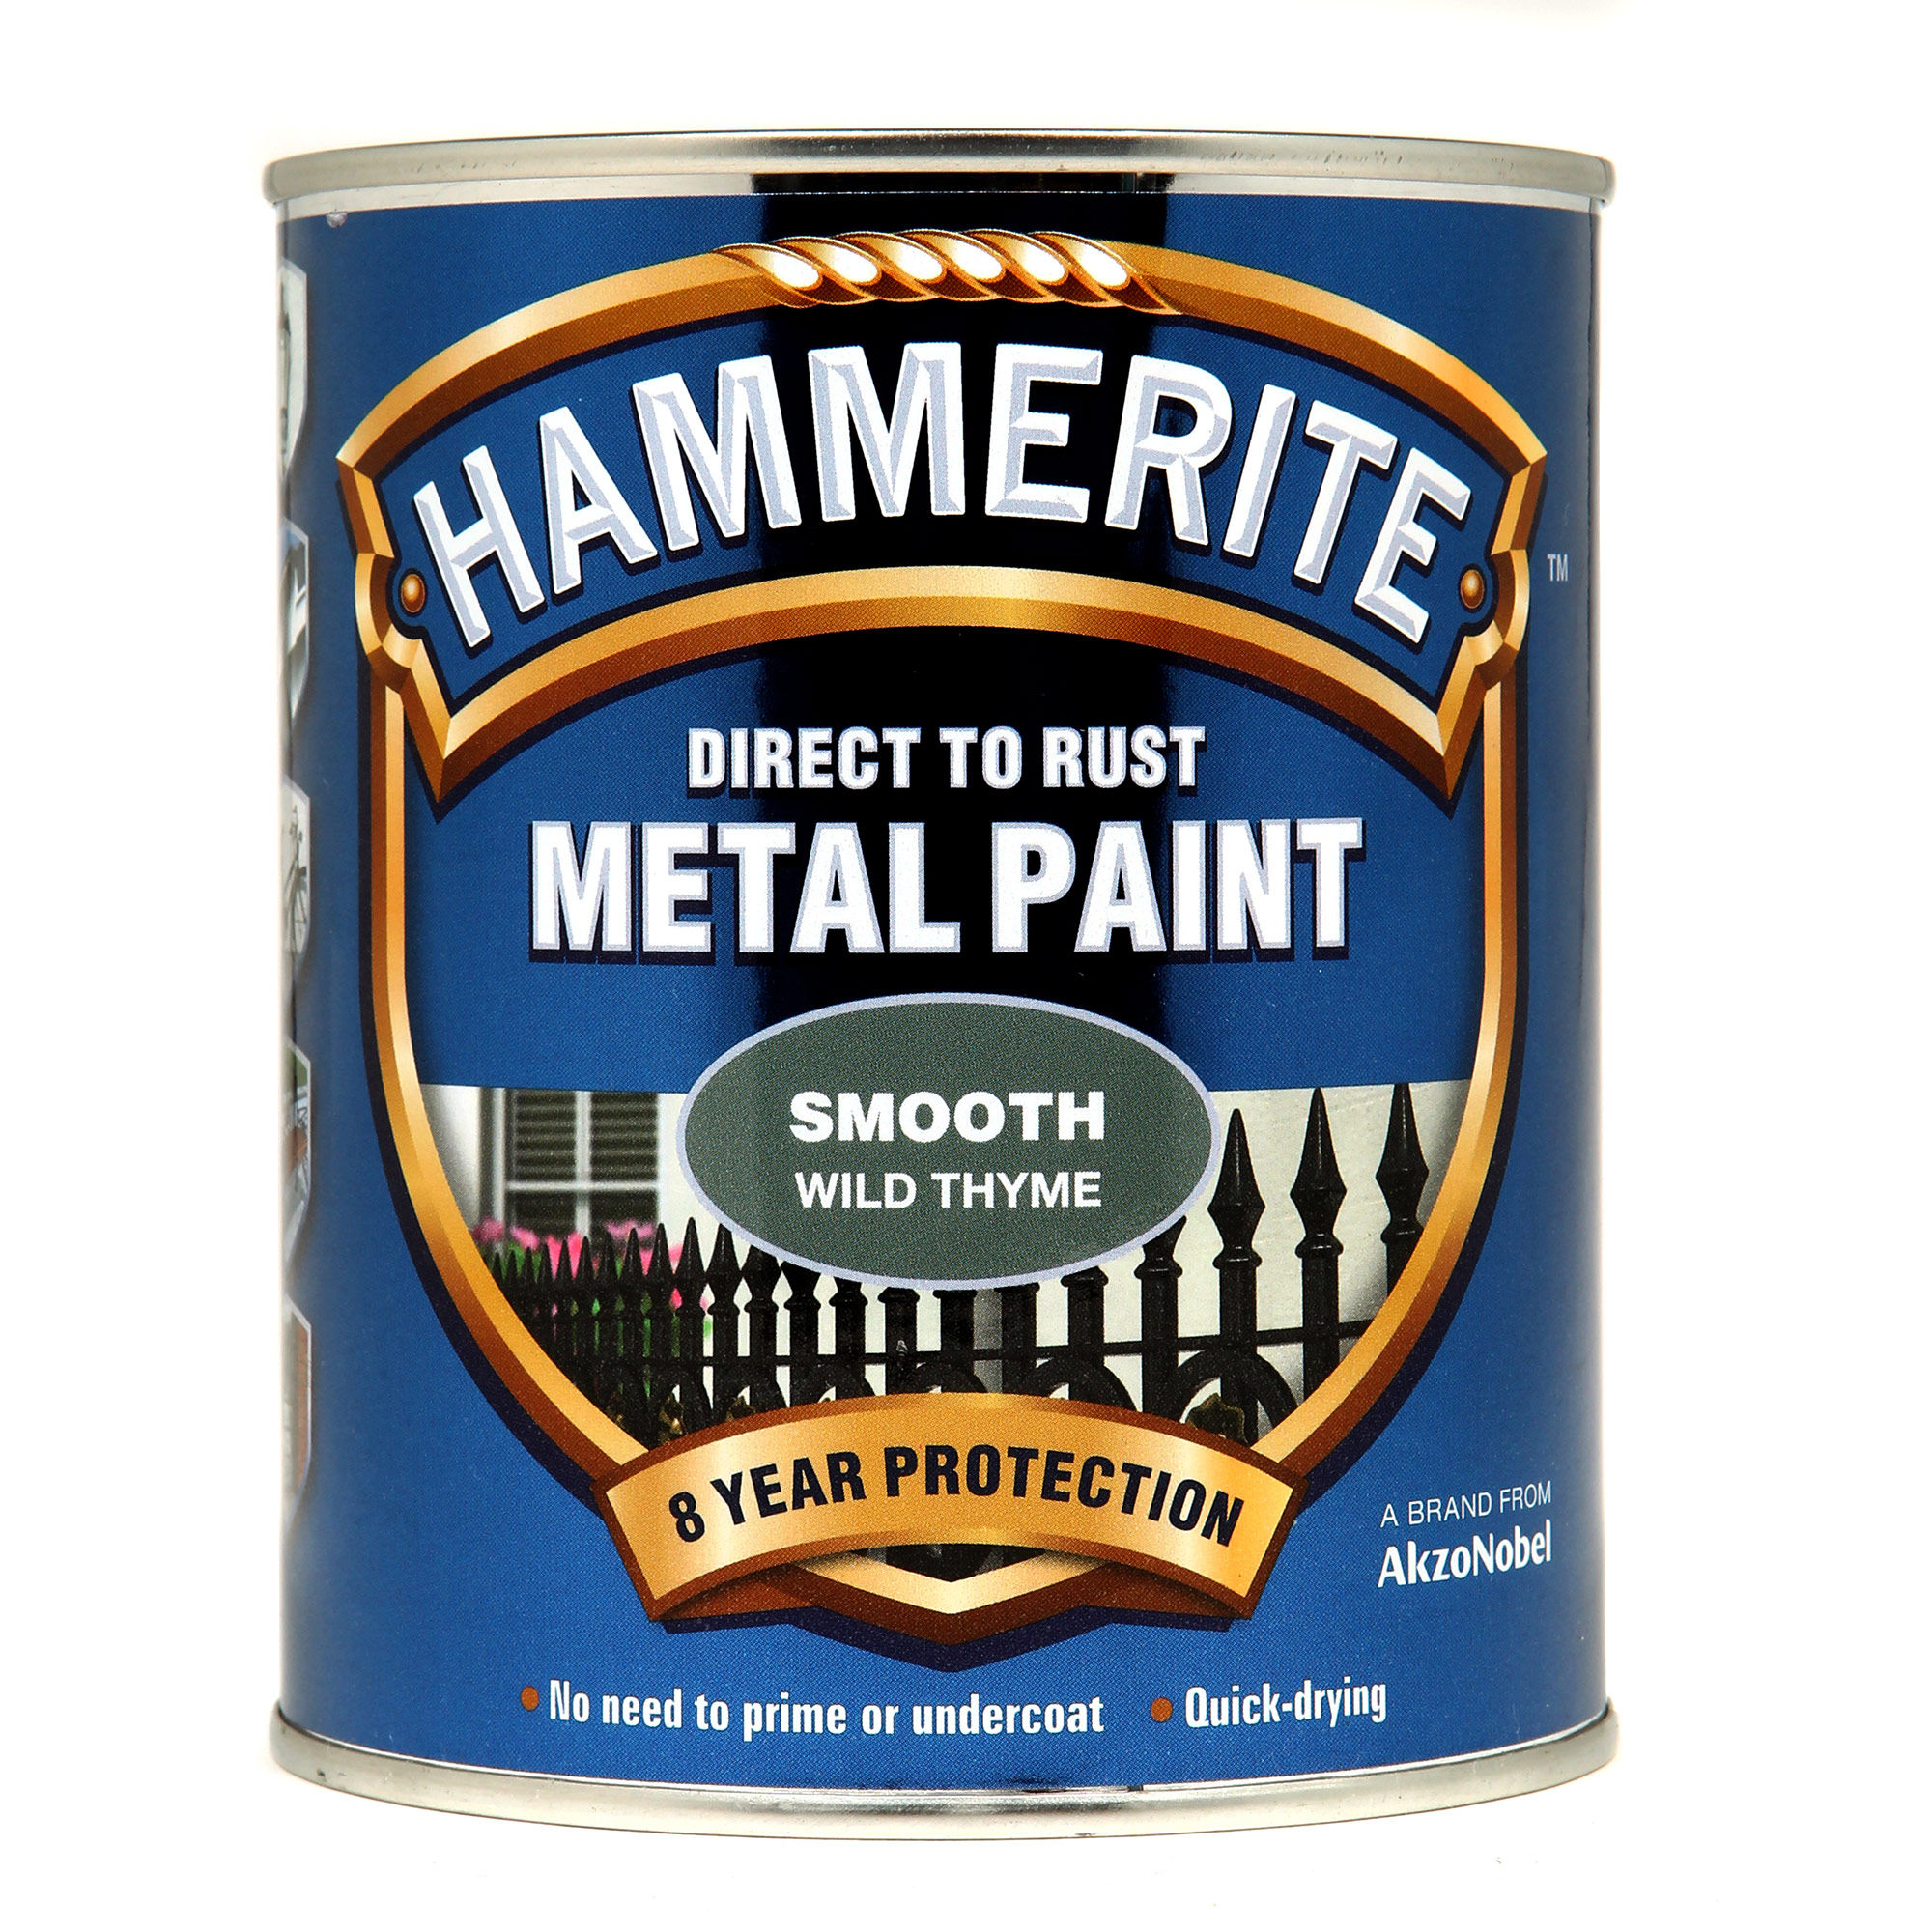 Hammerite Direct to Rust Metal Paint Smooth Finish Wild Thyme